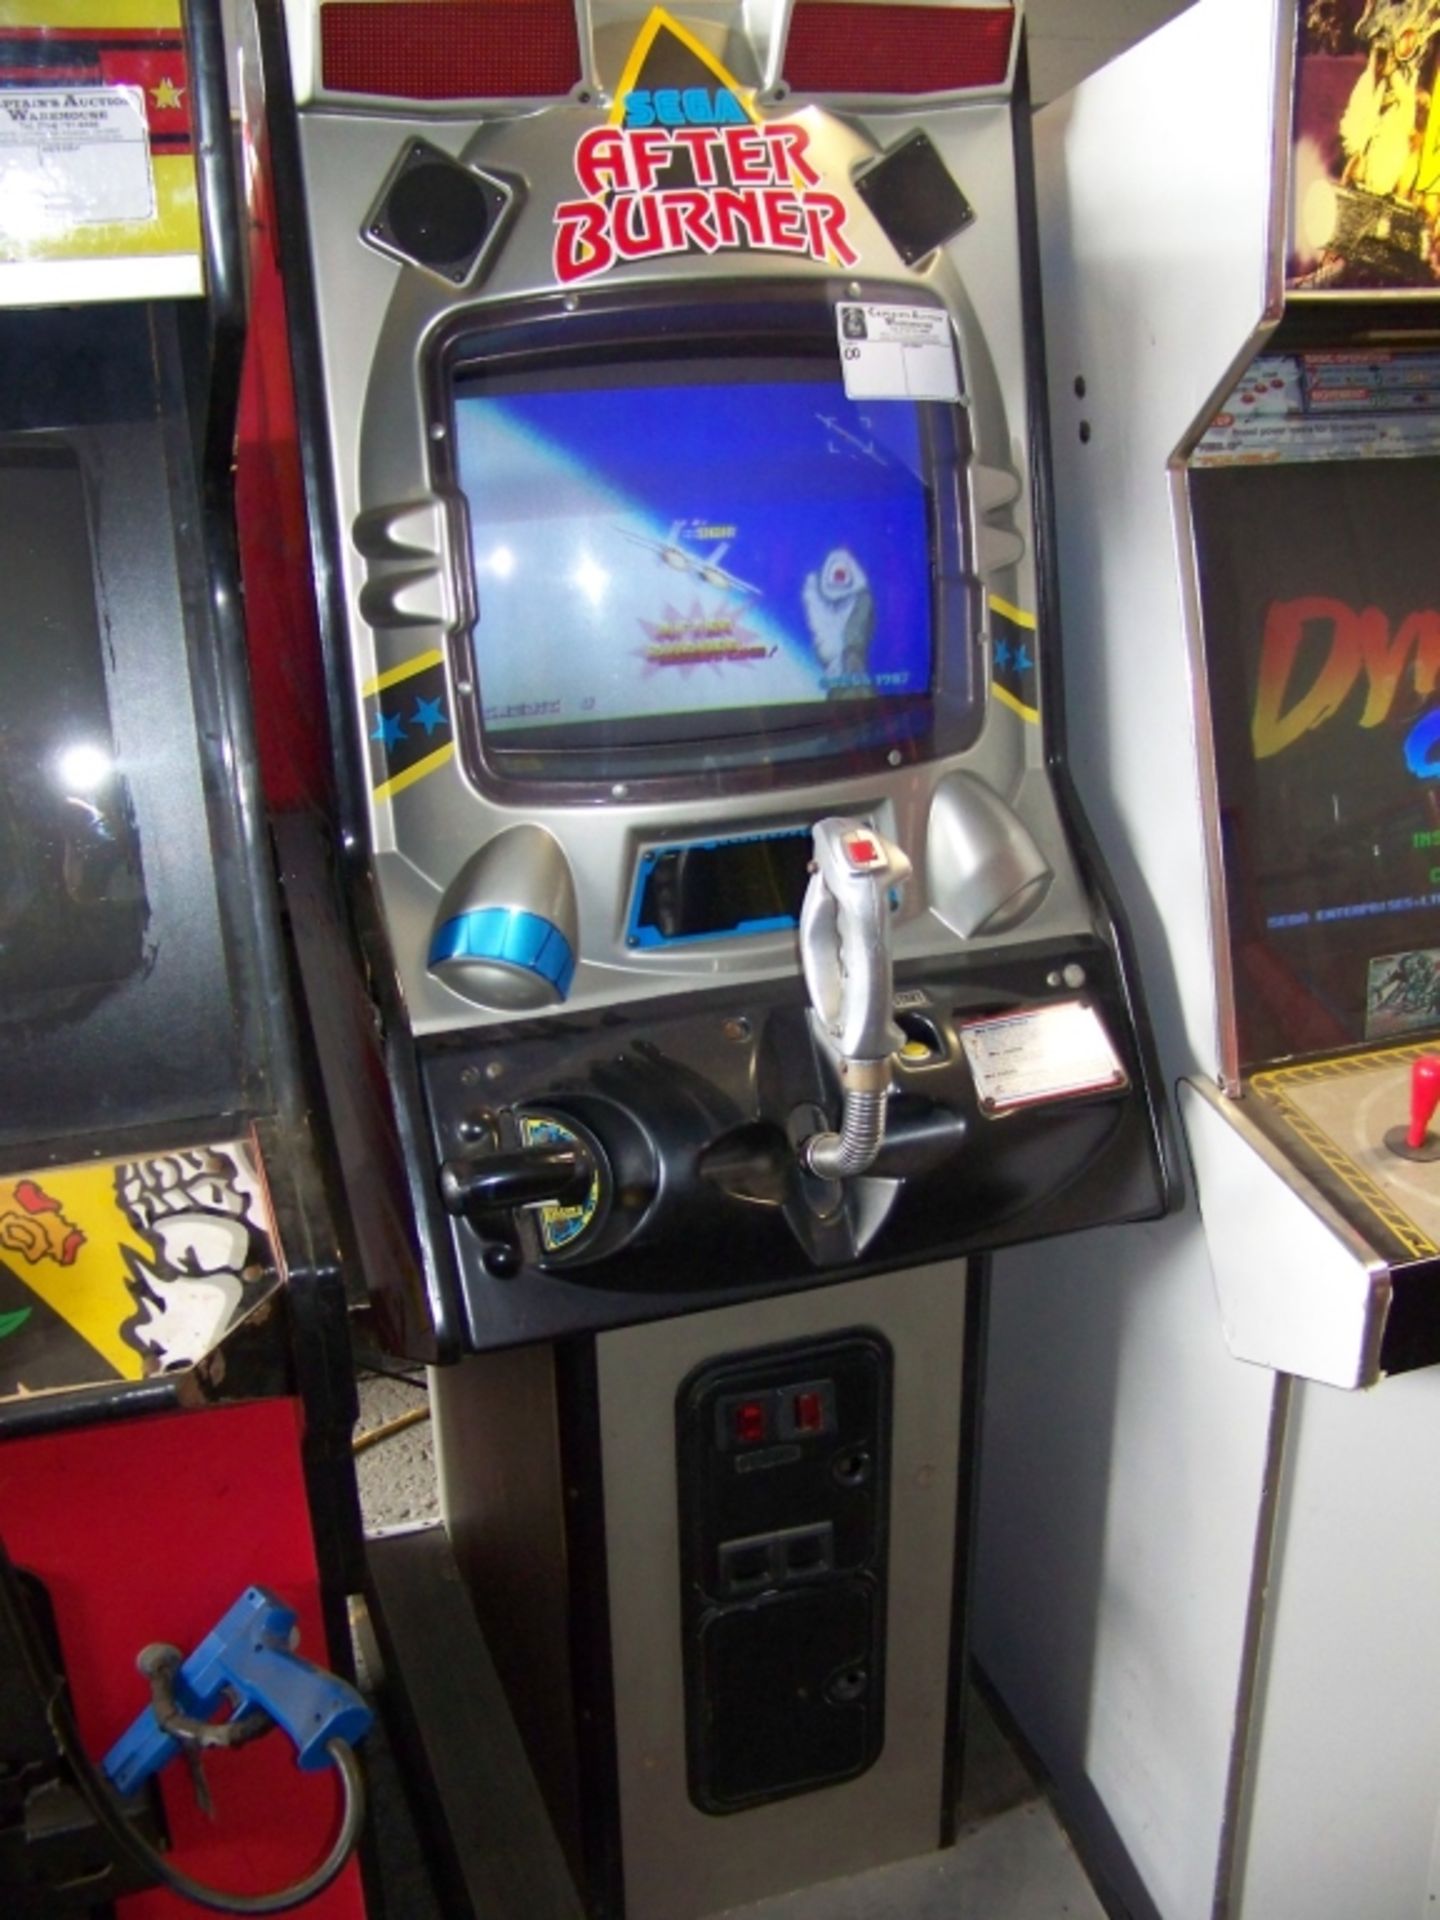 AFTERBURNER UPRIGHT CLASSIC ARCADE GAME - Image 2 of 2